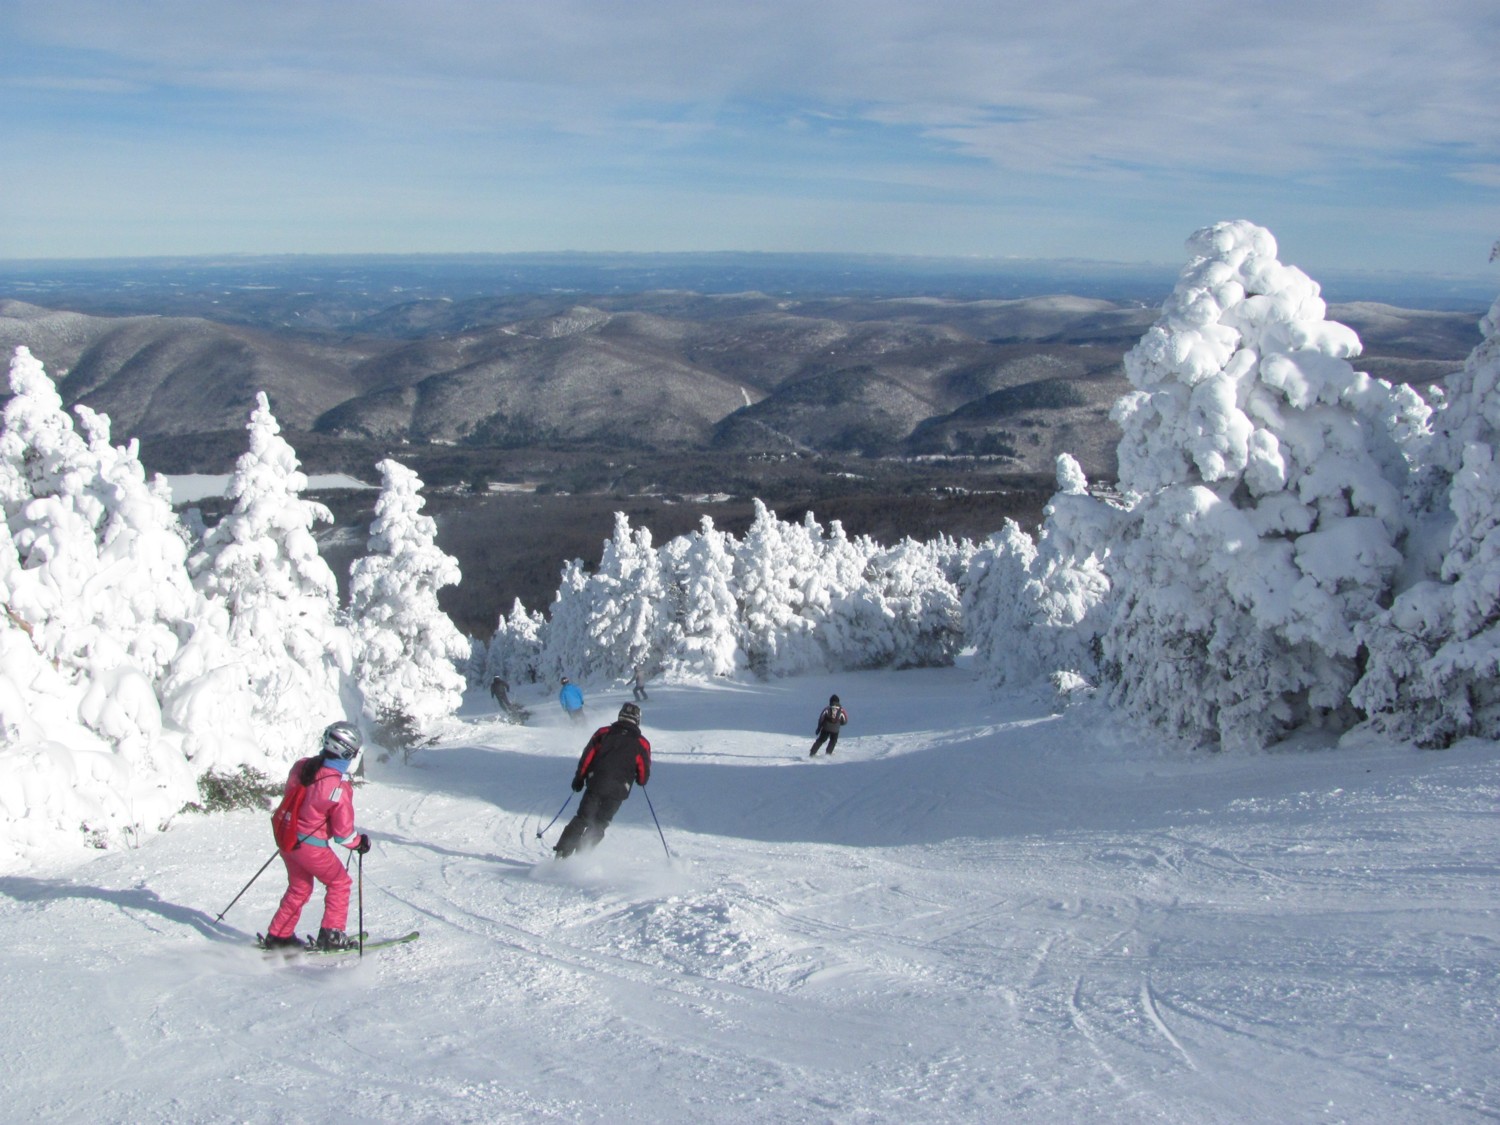 Skiing Pico, which together with Killington, affords six mountains to explore, the largest ski resort in the Northeast. Killington is hosting the Alpine World Cup © 2016 Karen Rubin/goingplacesfarandnear.com